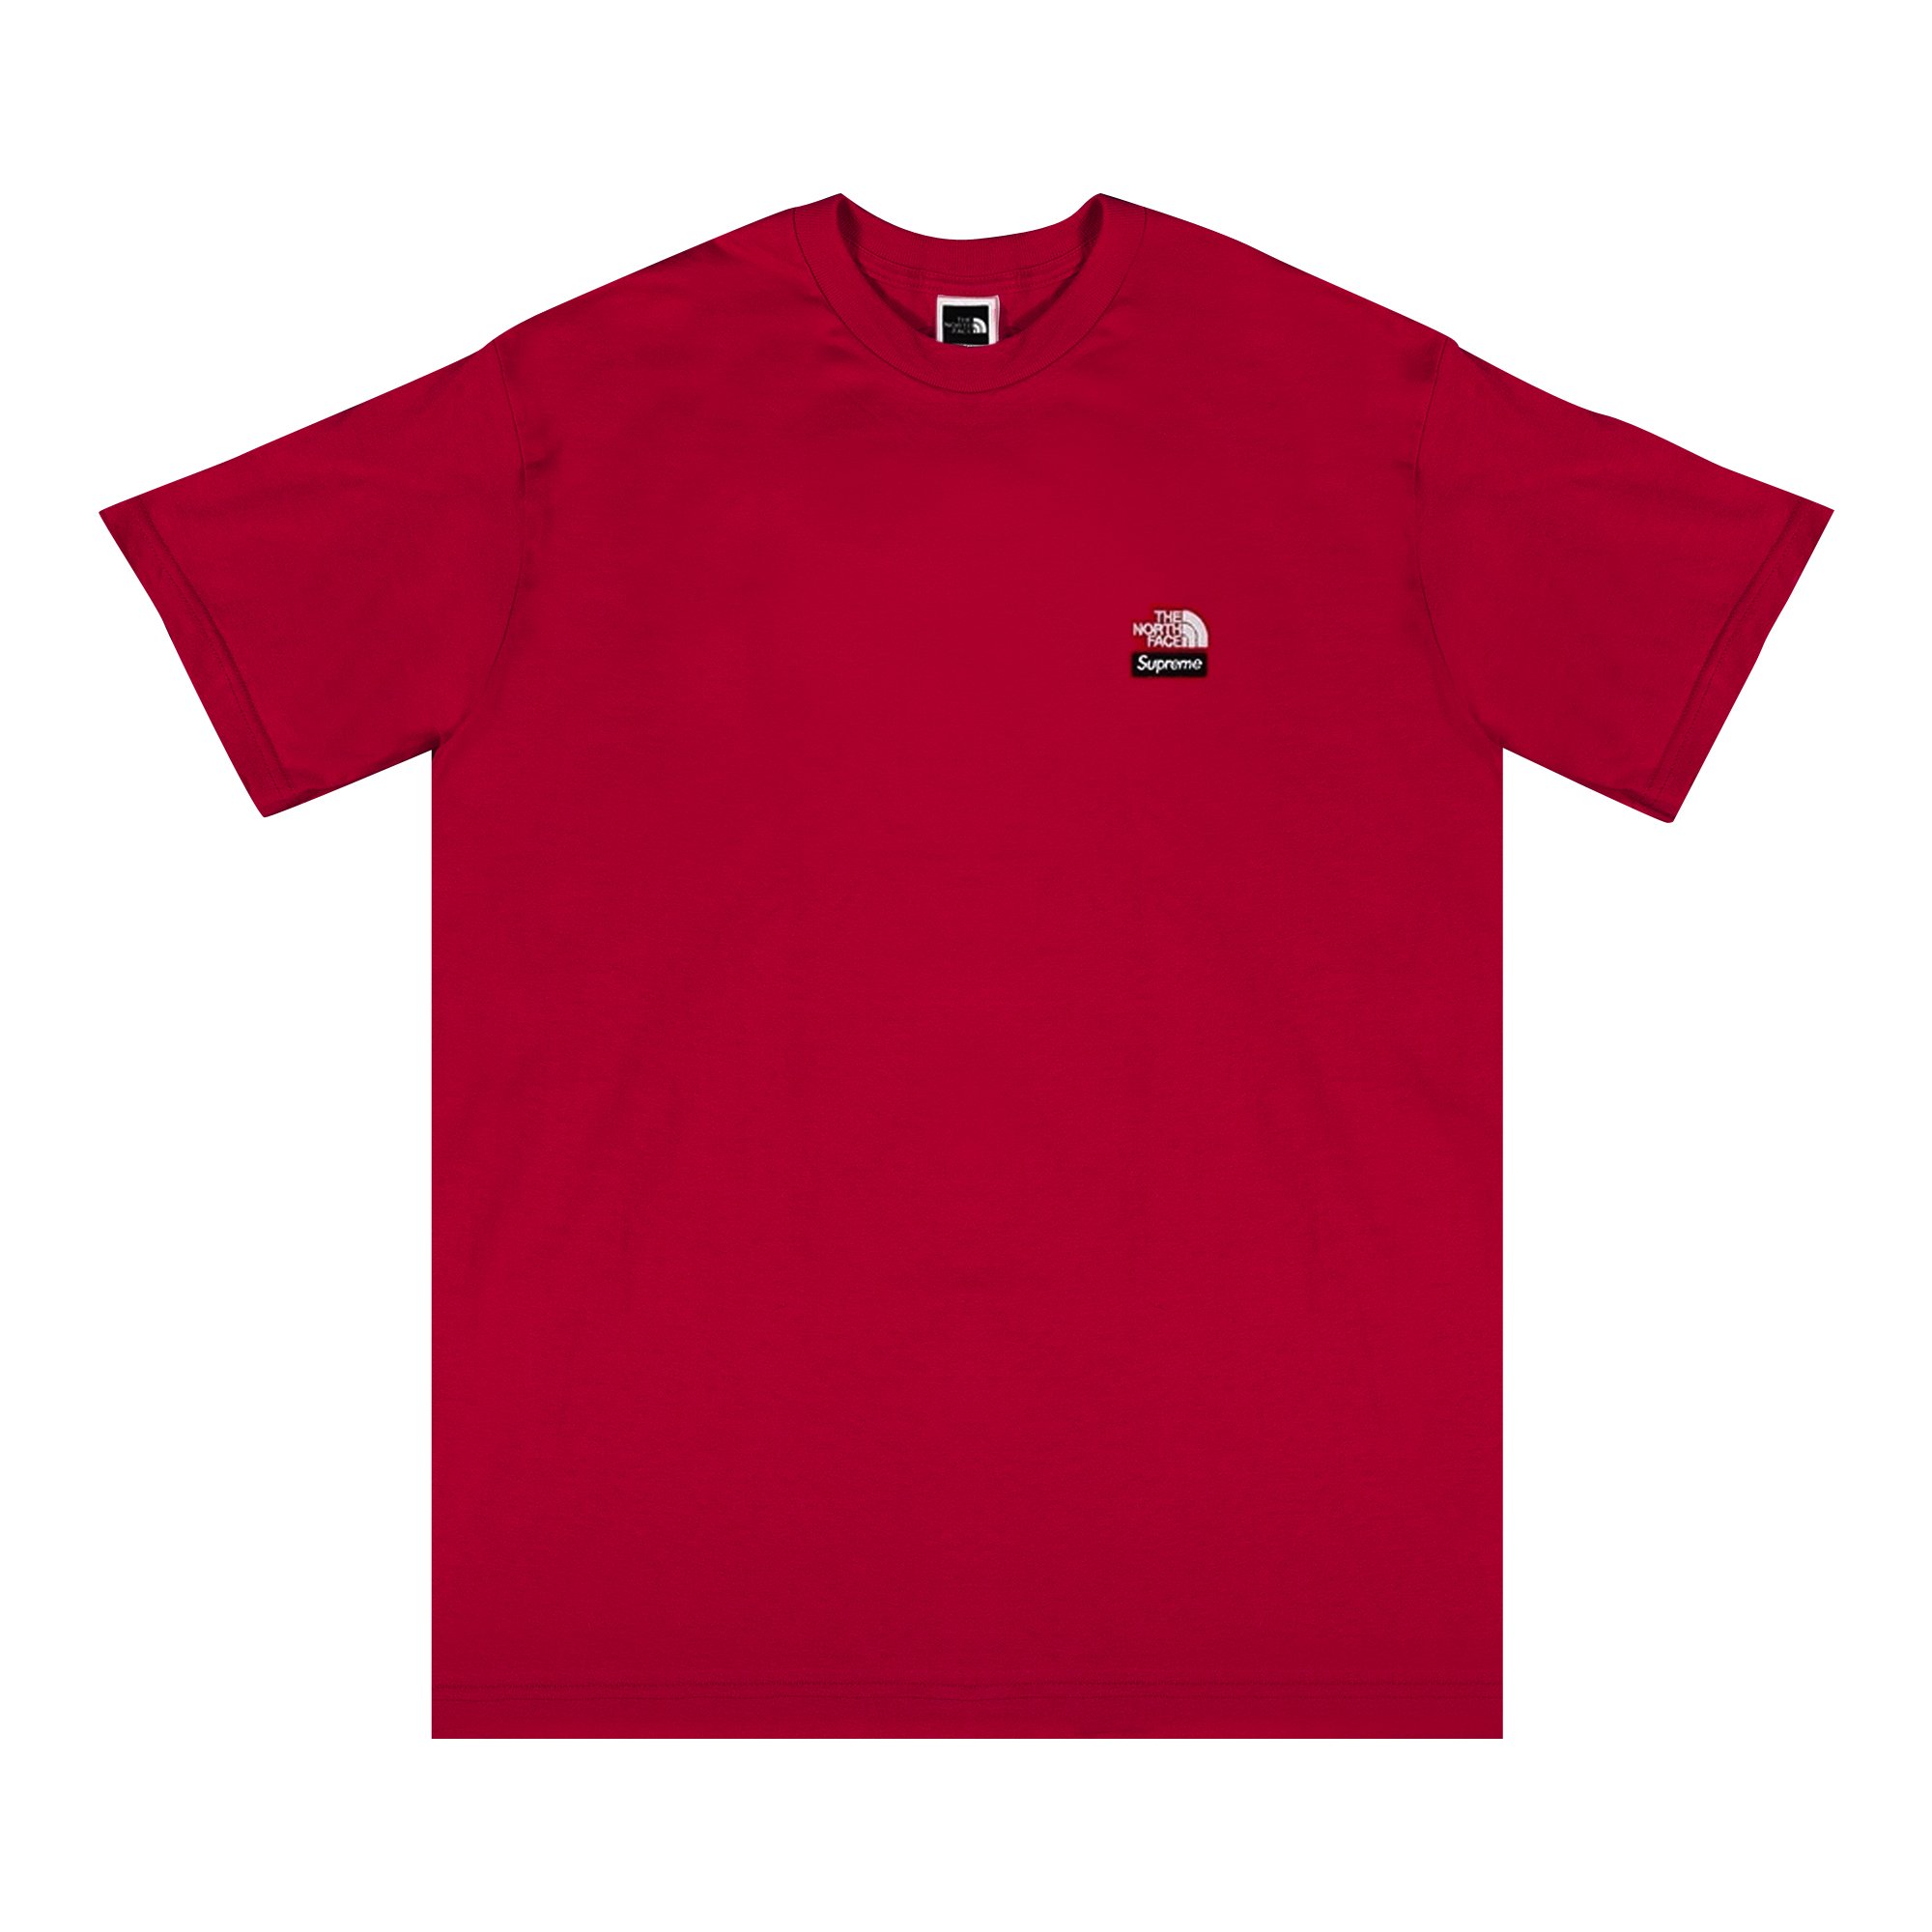 Buy Supreme x The North Face Bandana Tee 'Red' - SS22KN4 RED | GOAT CA